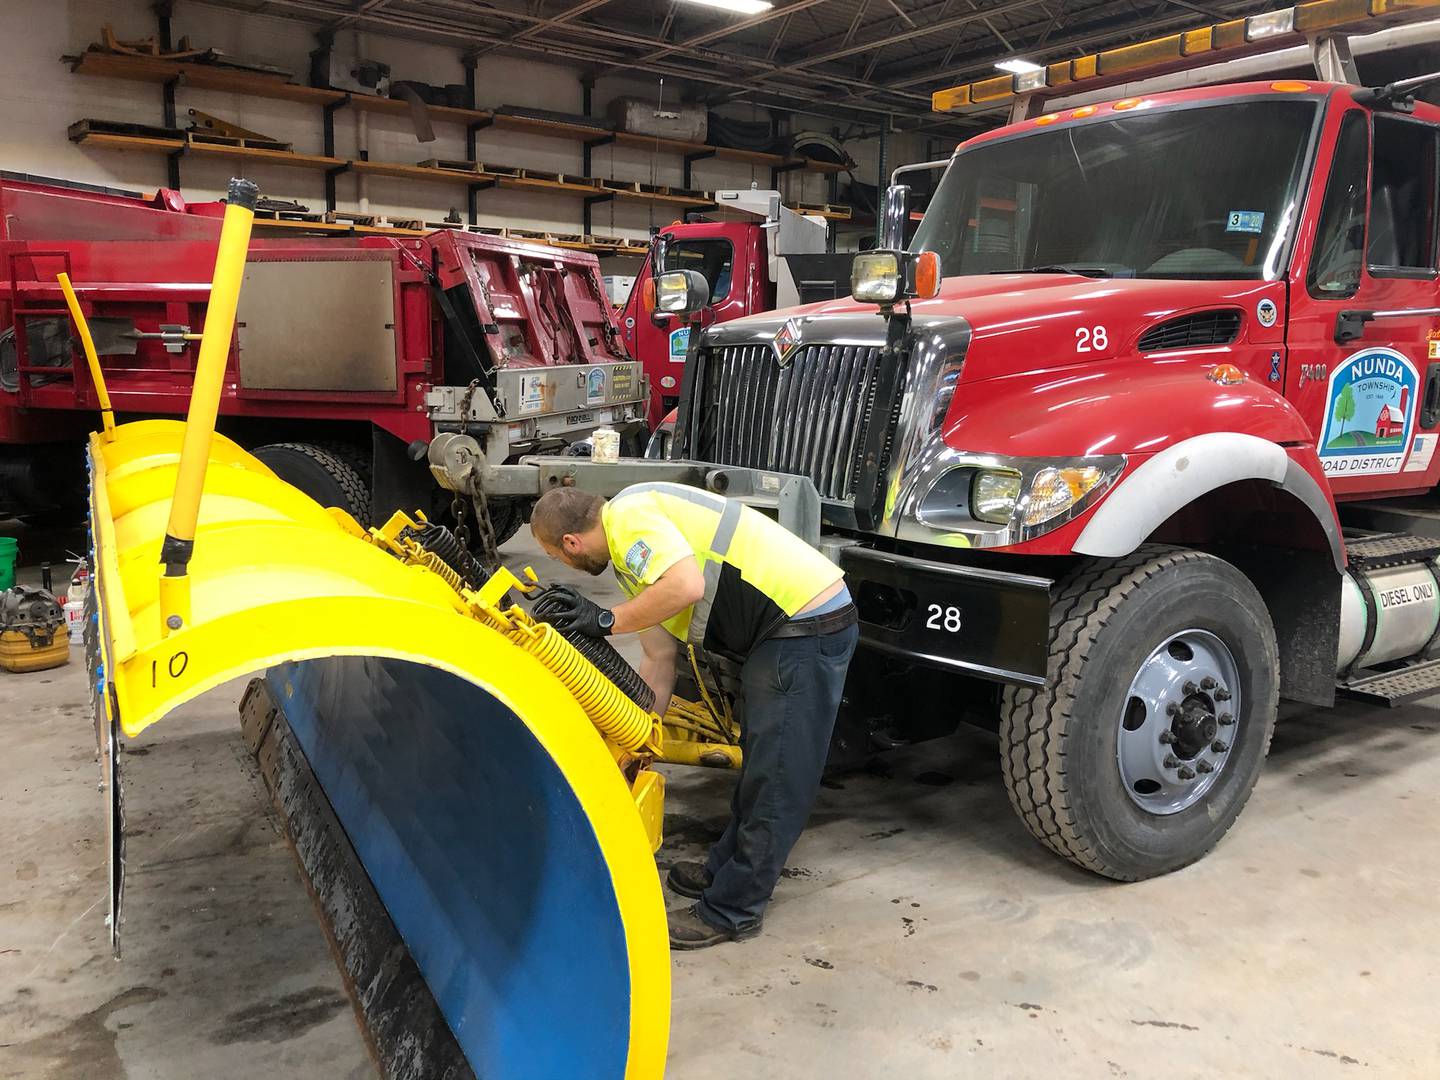 A Nunda Township Road District employee sets up the plow frame on a snow removal vehicle. The road district's Highway Commissioner Mike Lesperance won a ruling from a McHenry County judge last week in a lawsuit he filed against the Nunda Township Board of Trustees.